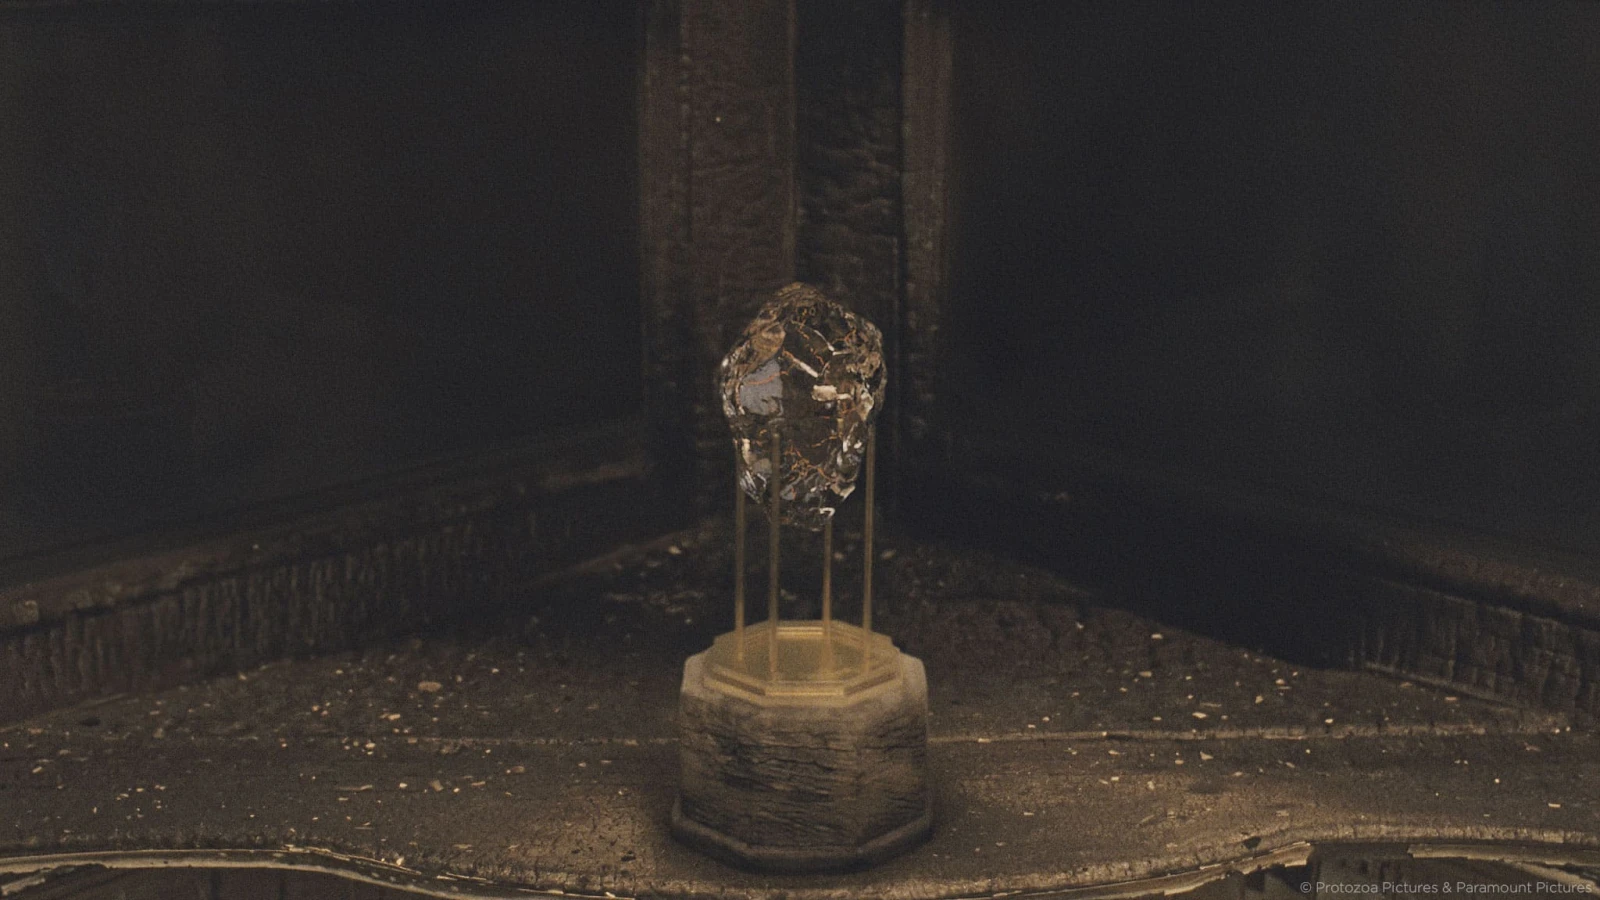  Mother! shot of the cristal diamond from Raynault vfx 